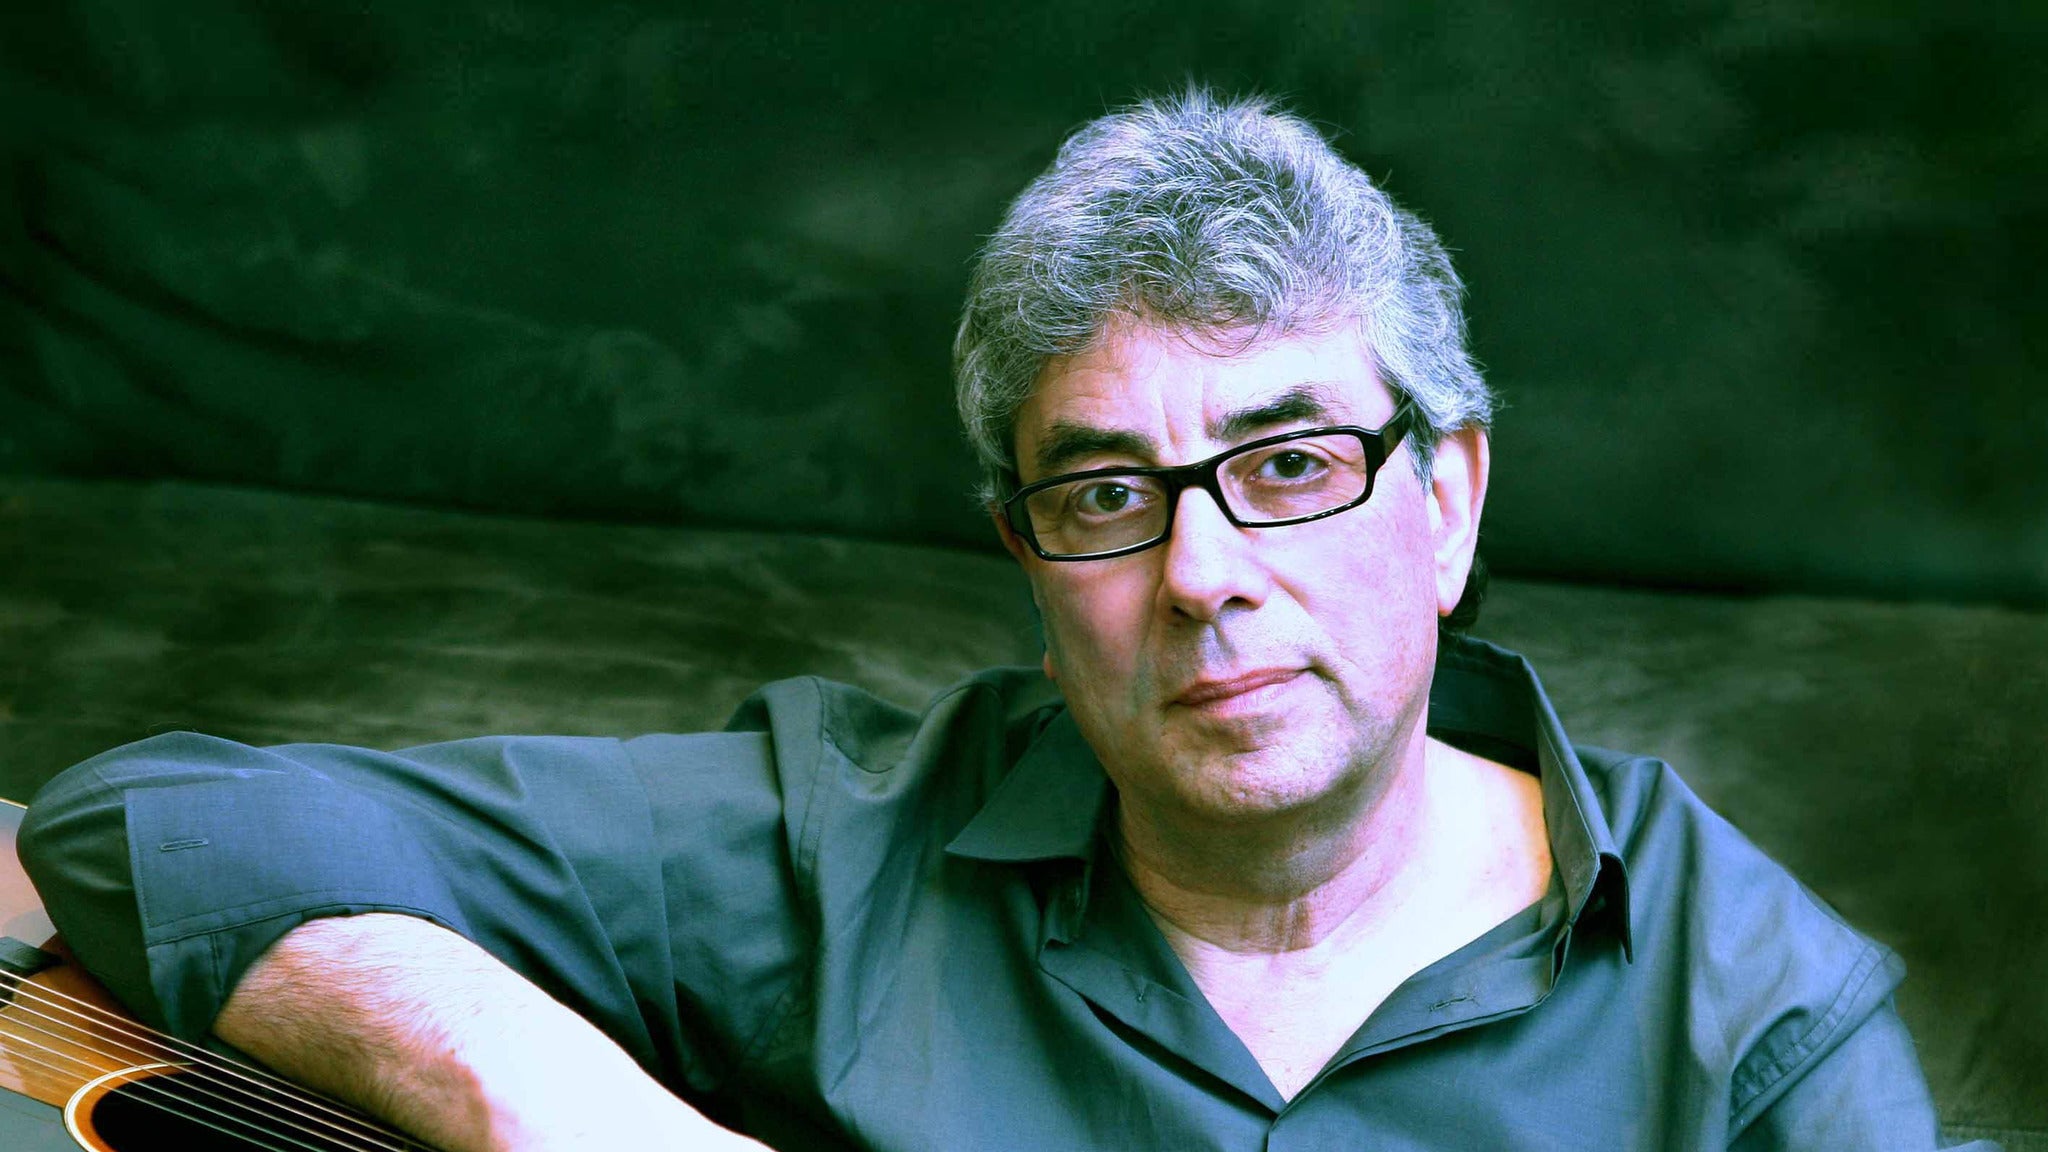 10cc's Graham Gouldman & Heart Full of Songs, Plus Graham's Q&A with S Event Title Pic